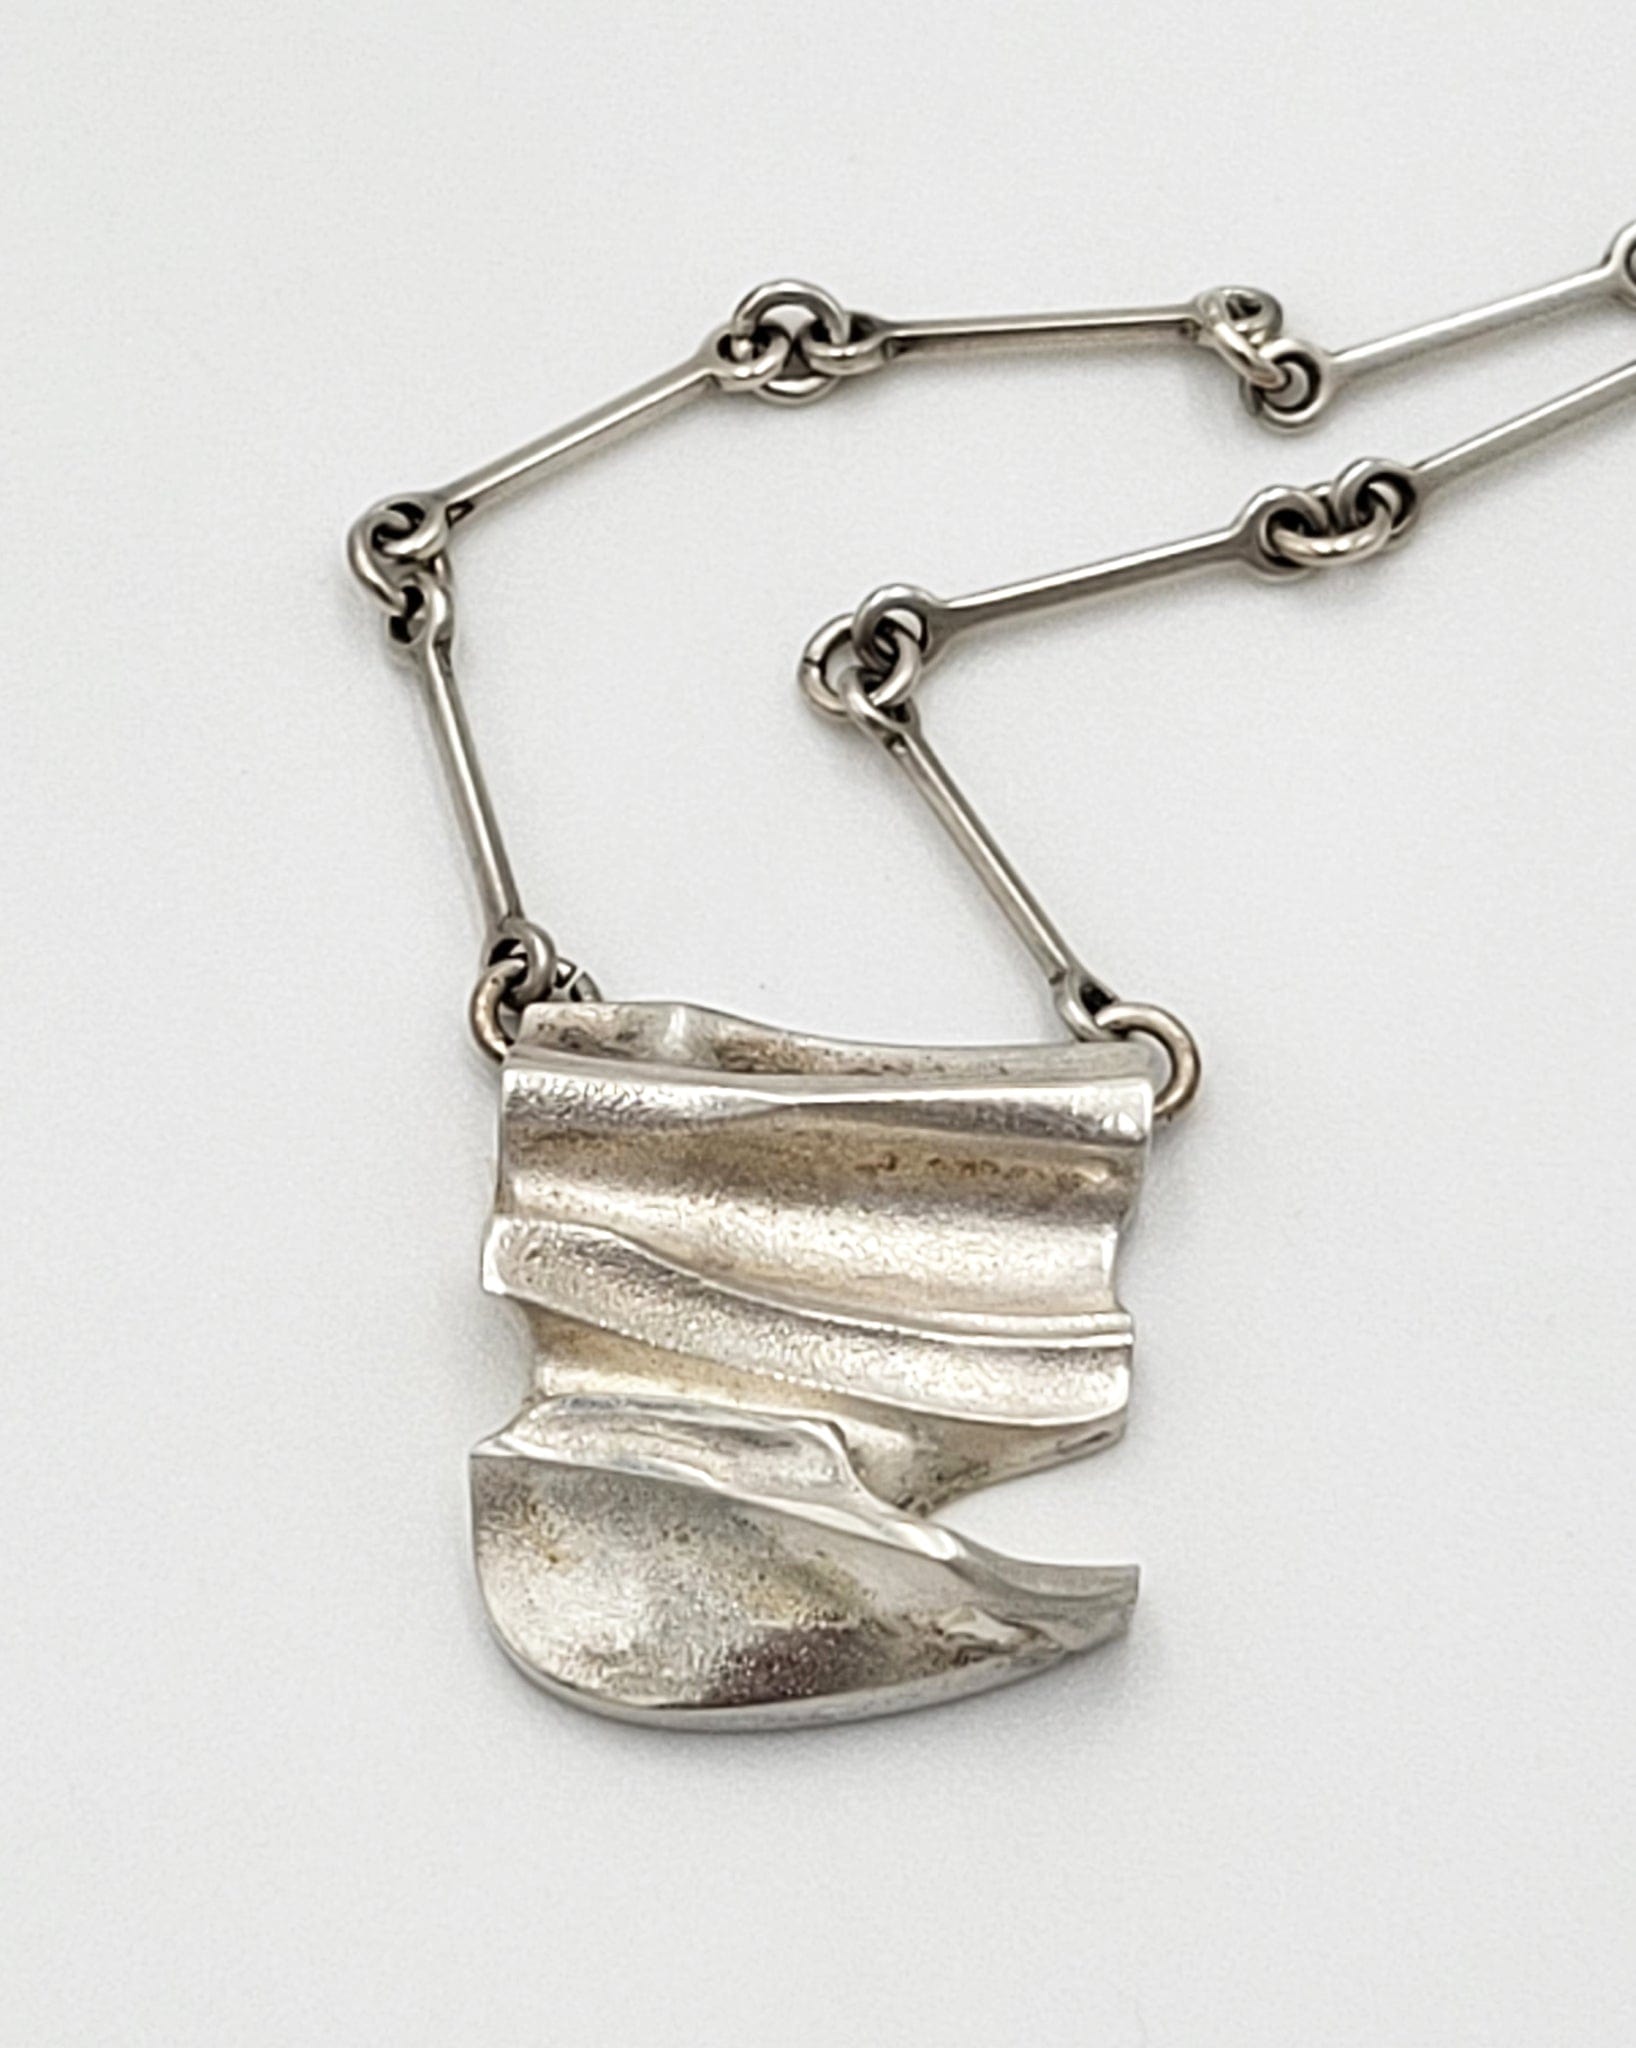 Lapponia Jewelry Superb Finnish Bjorn Weckstrom Lapponia Sterling Abstract Modernist Necklace 1983